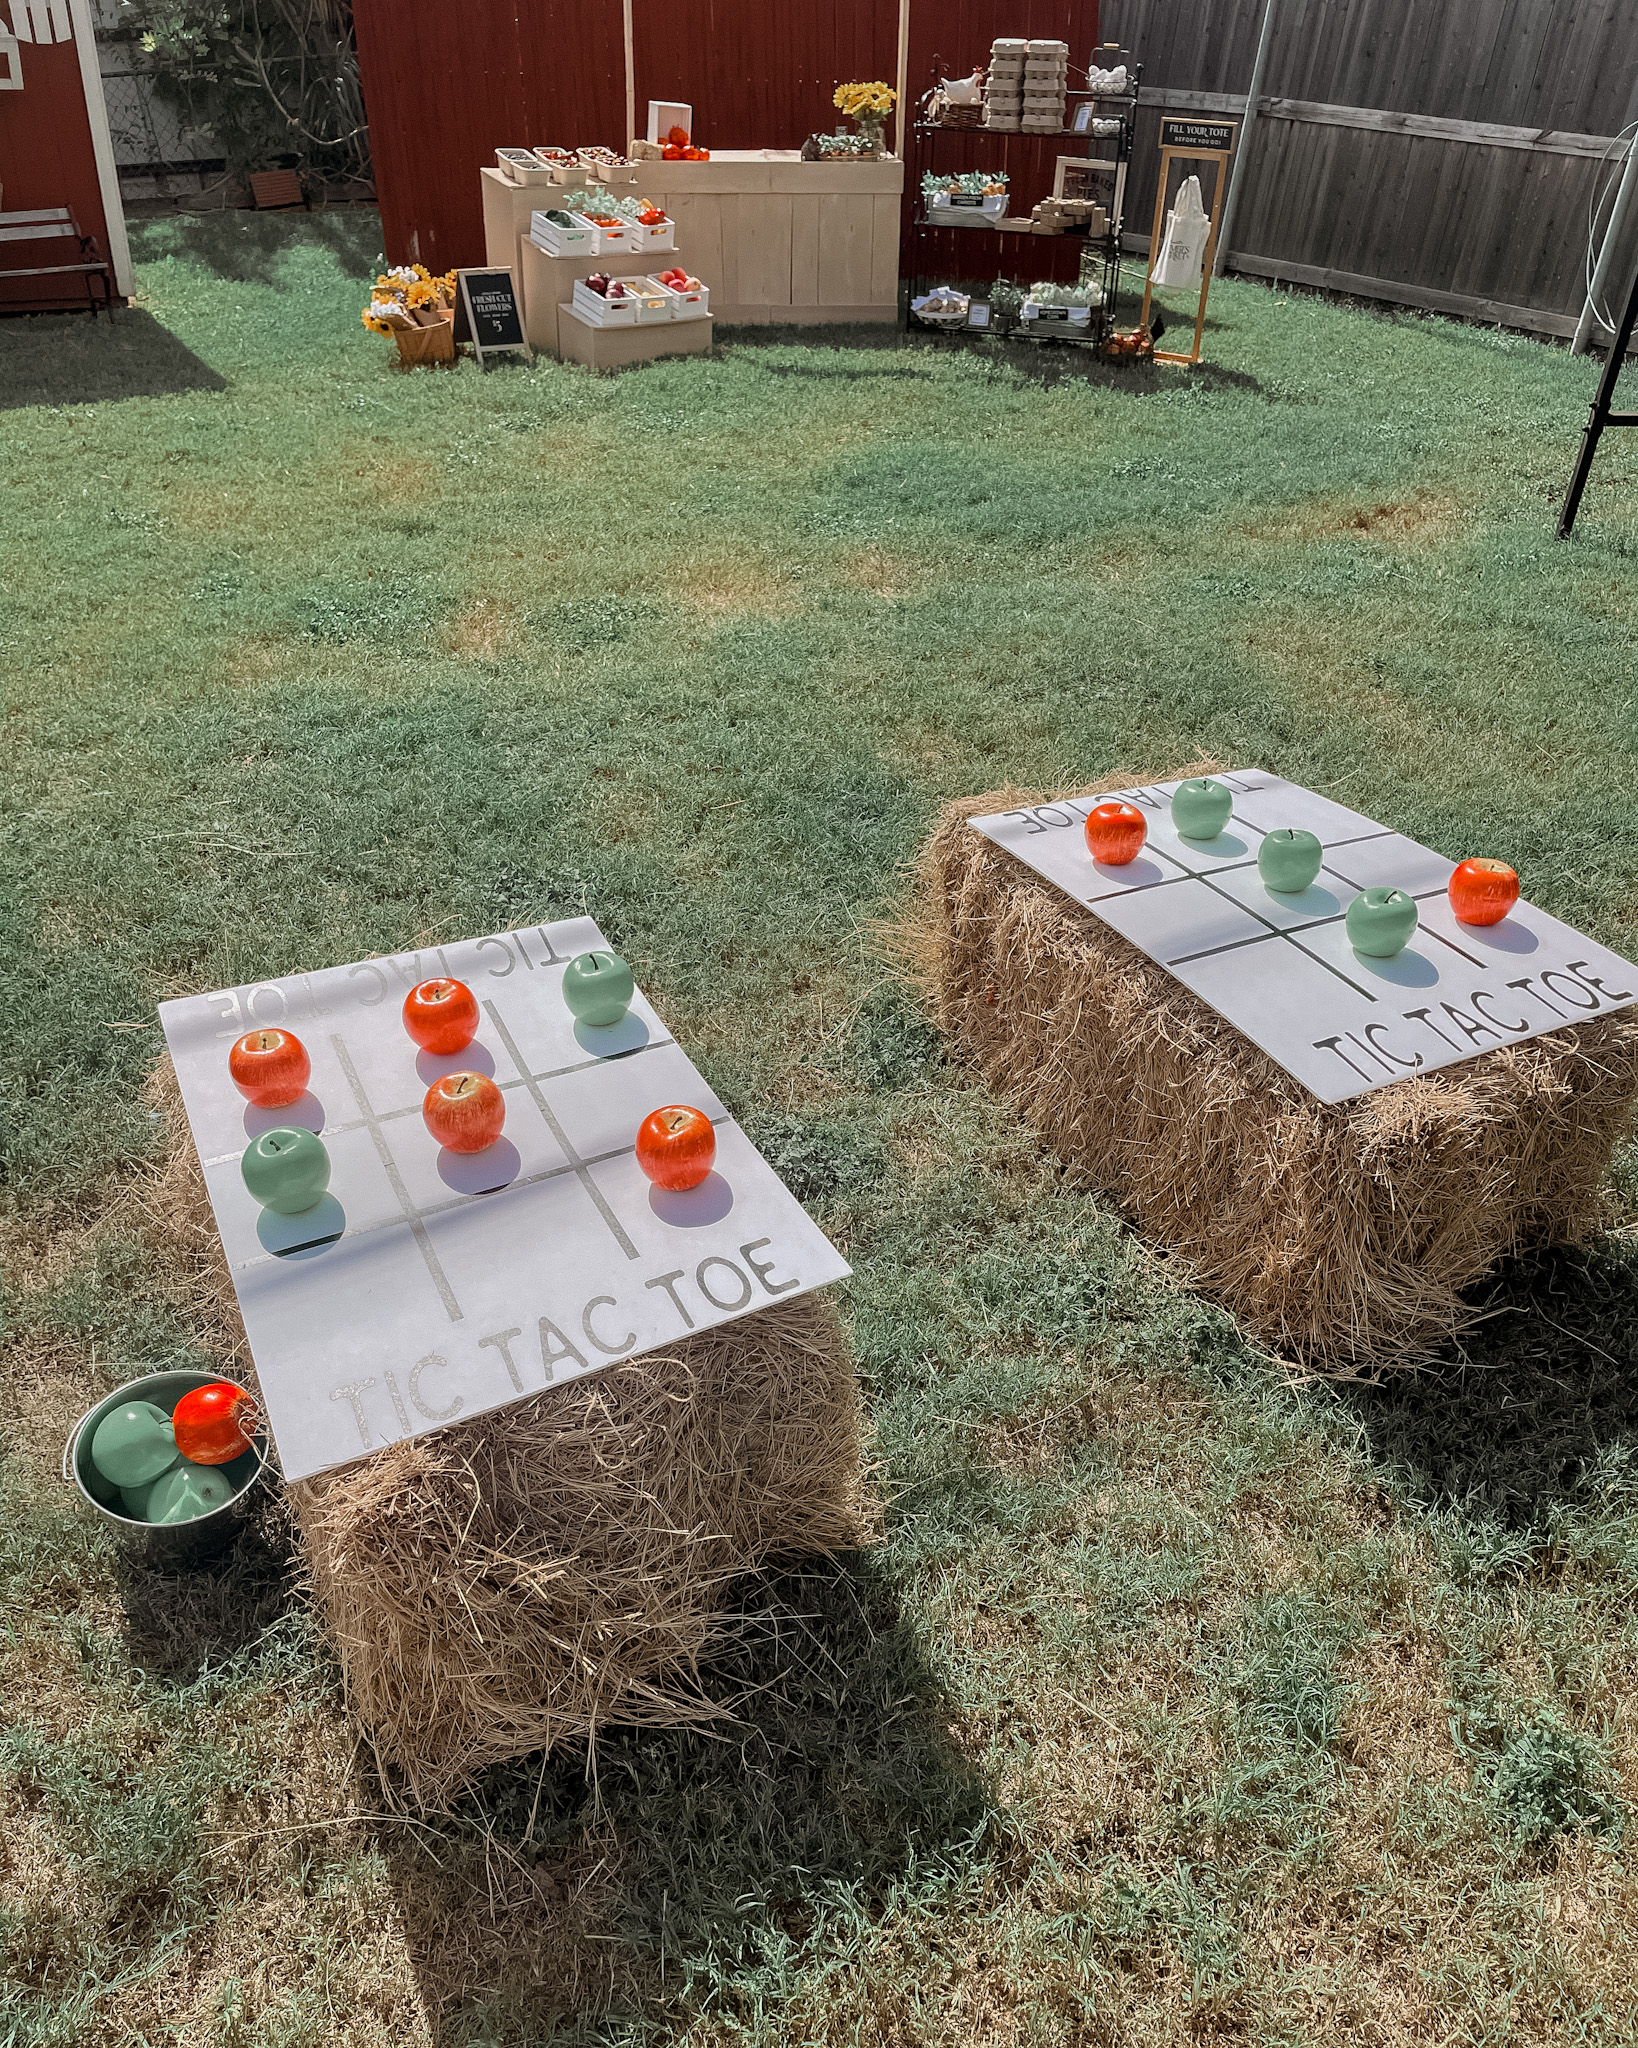 farmers market party activities, games and more! Apple tic tac toe on a hay bale